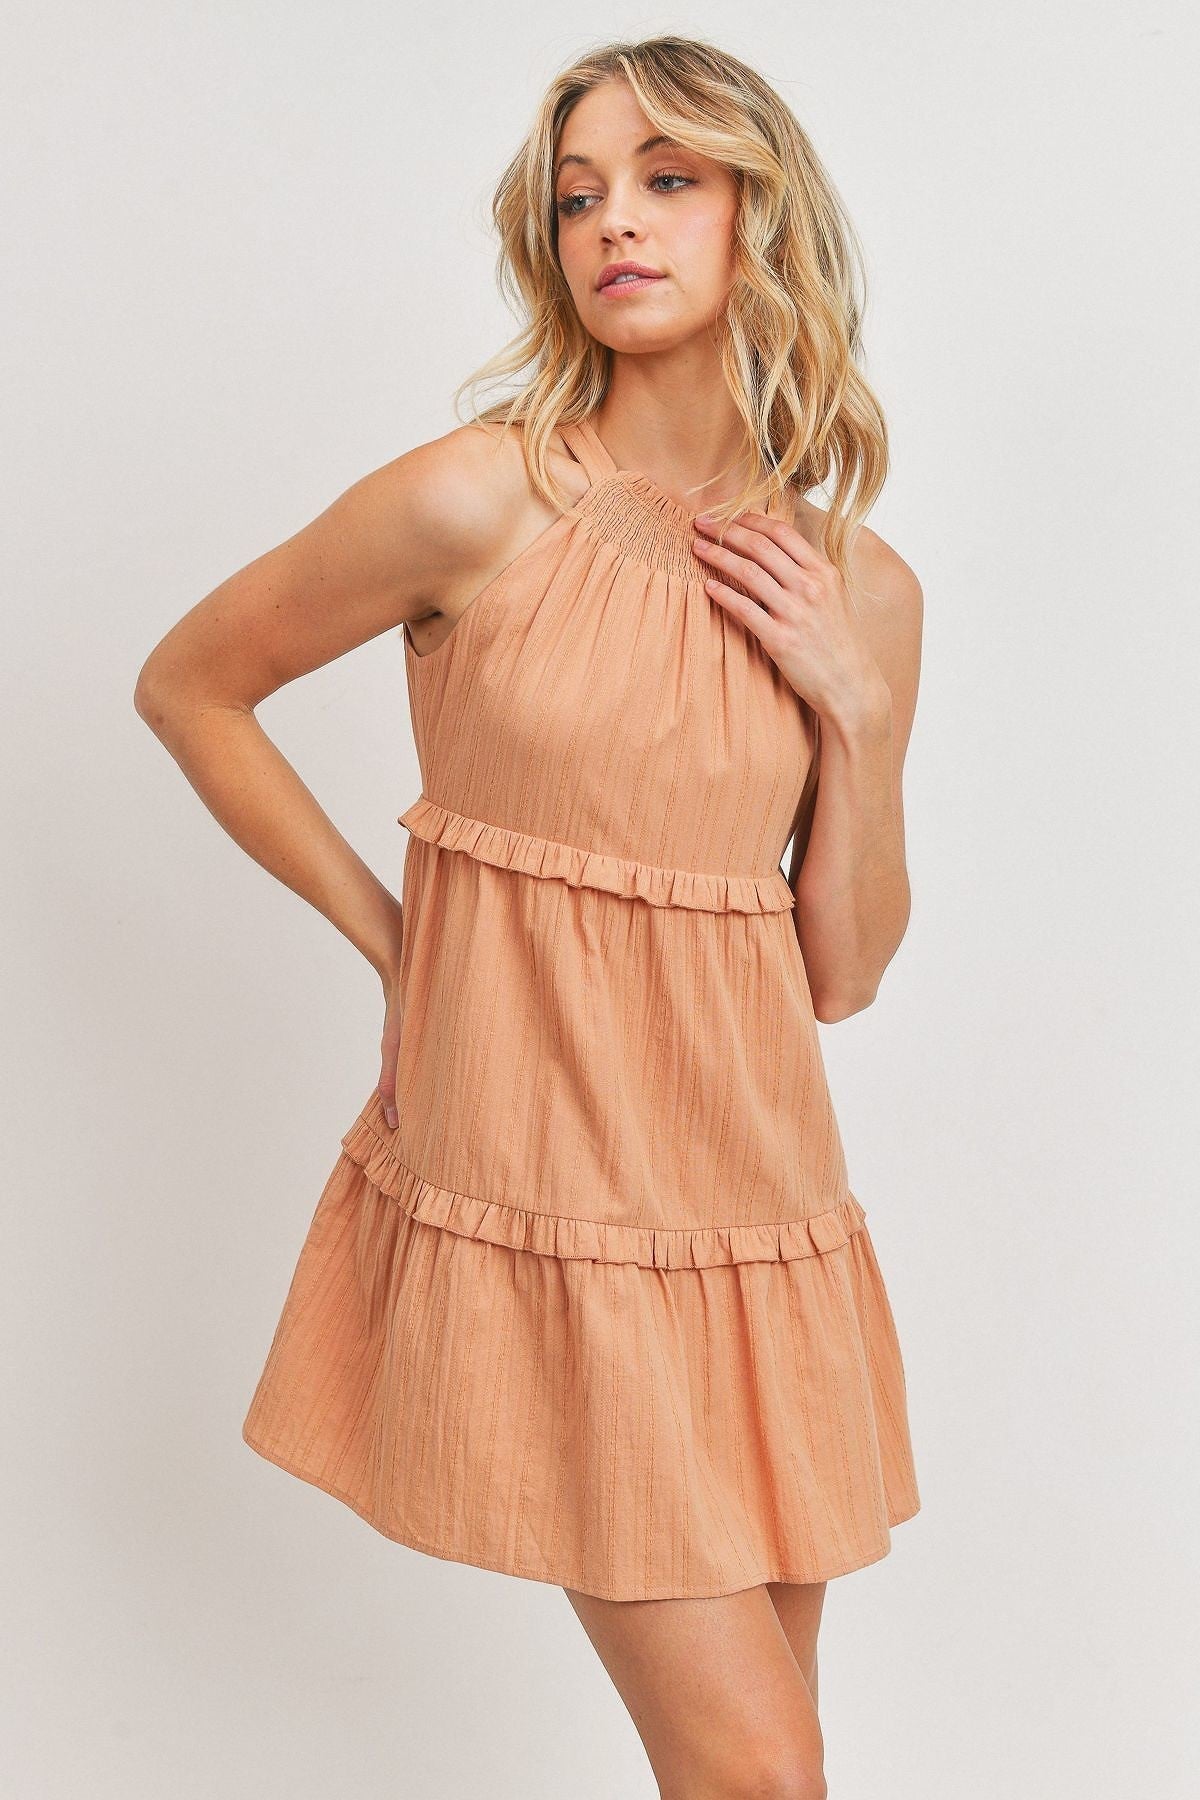 Textured Woven Fabric With Tiered Orange Dress Dresses jehouze 